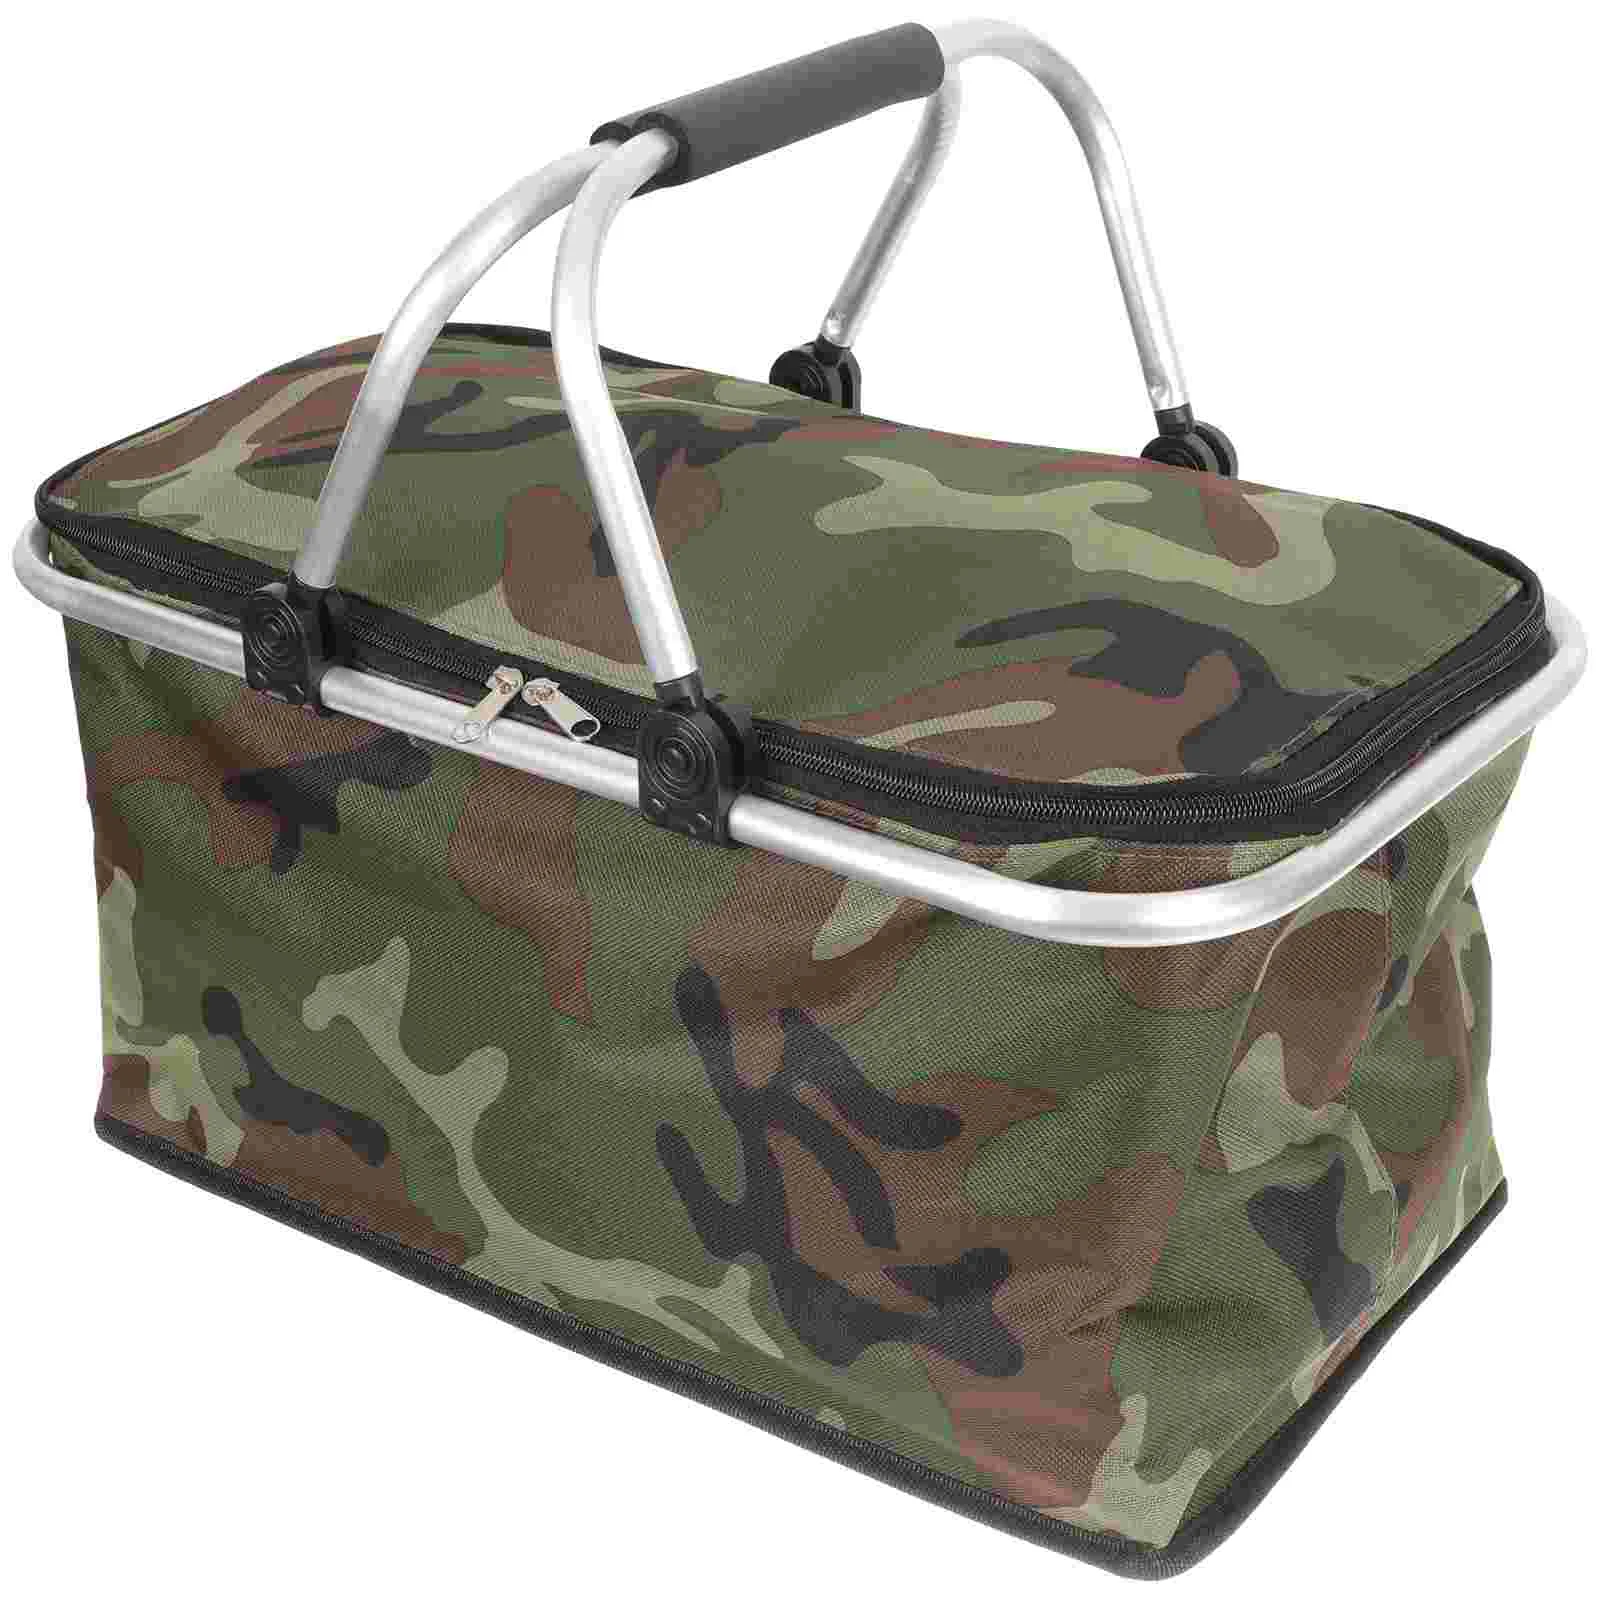 

Picnic Insulated Bento Delivery Large Lunch Carrying Cooler Carrier Portable Container Grocery Reusable Pizza Thermal Zipper